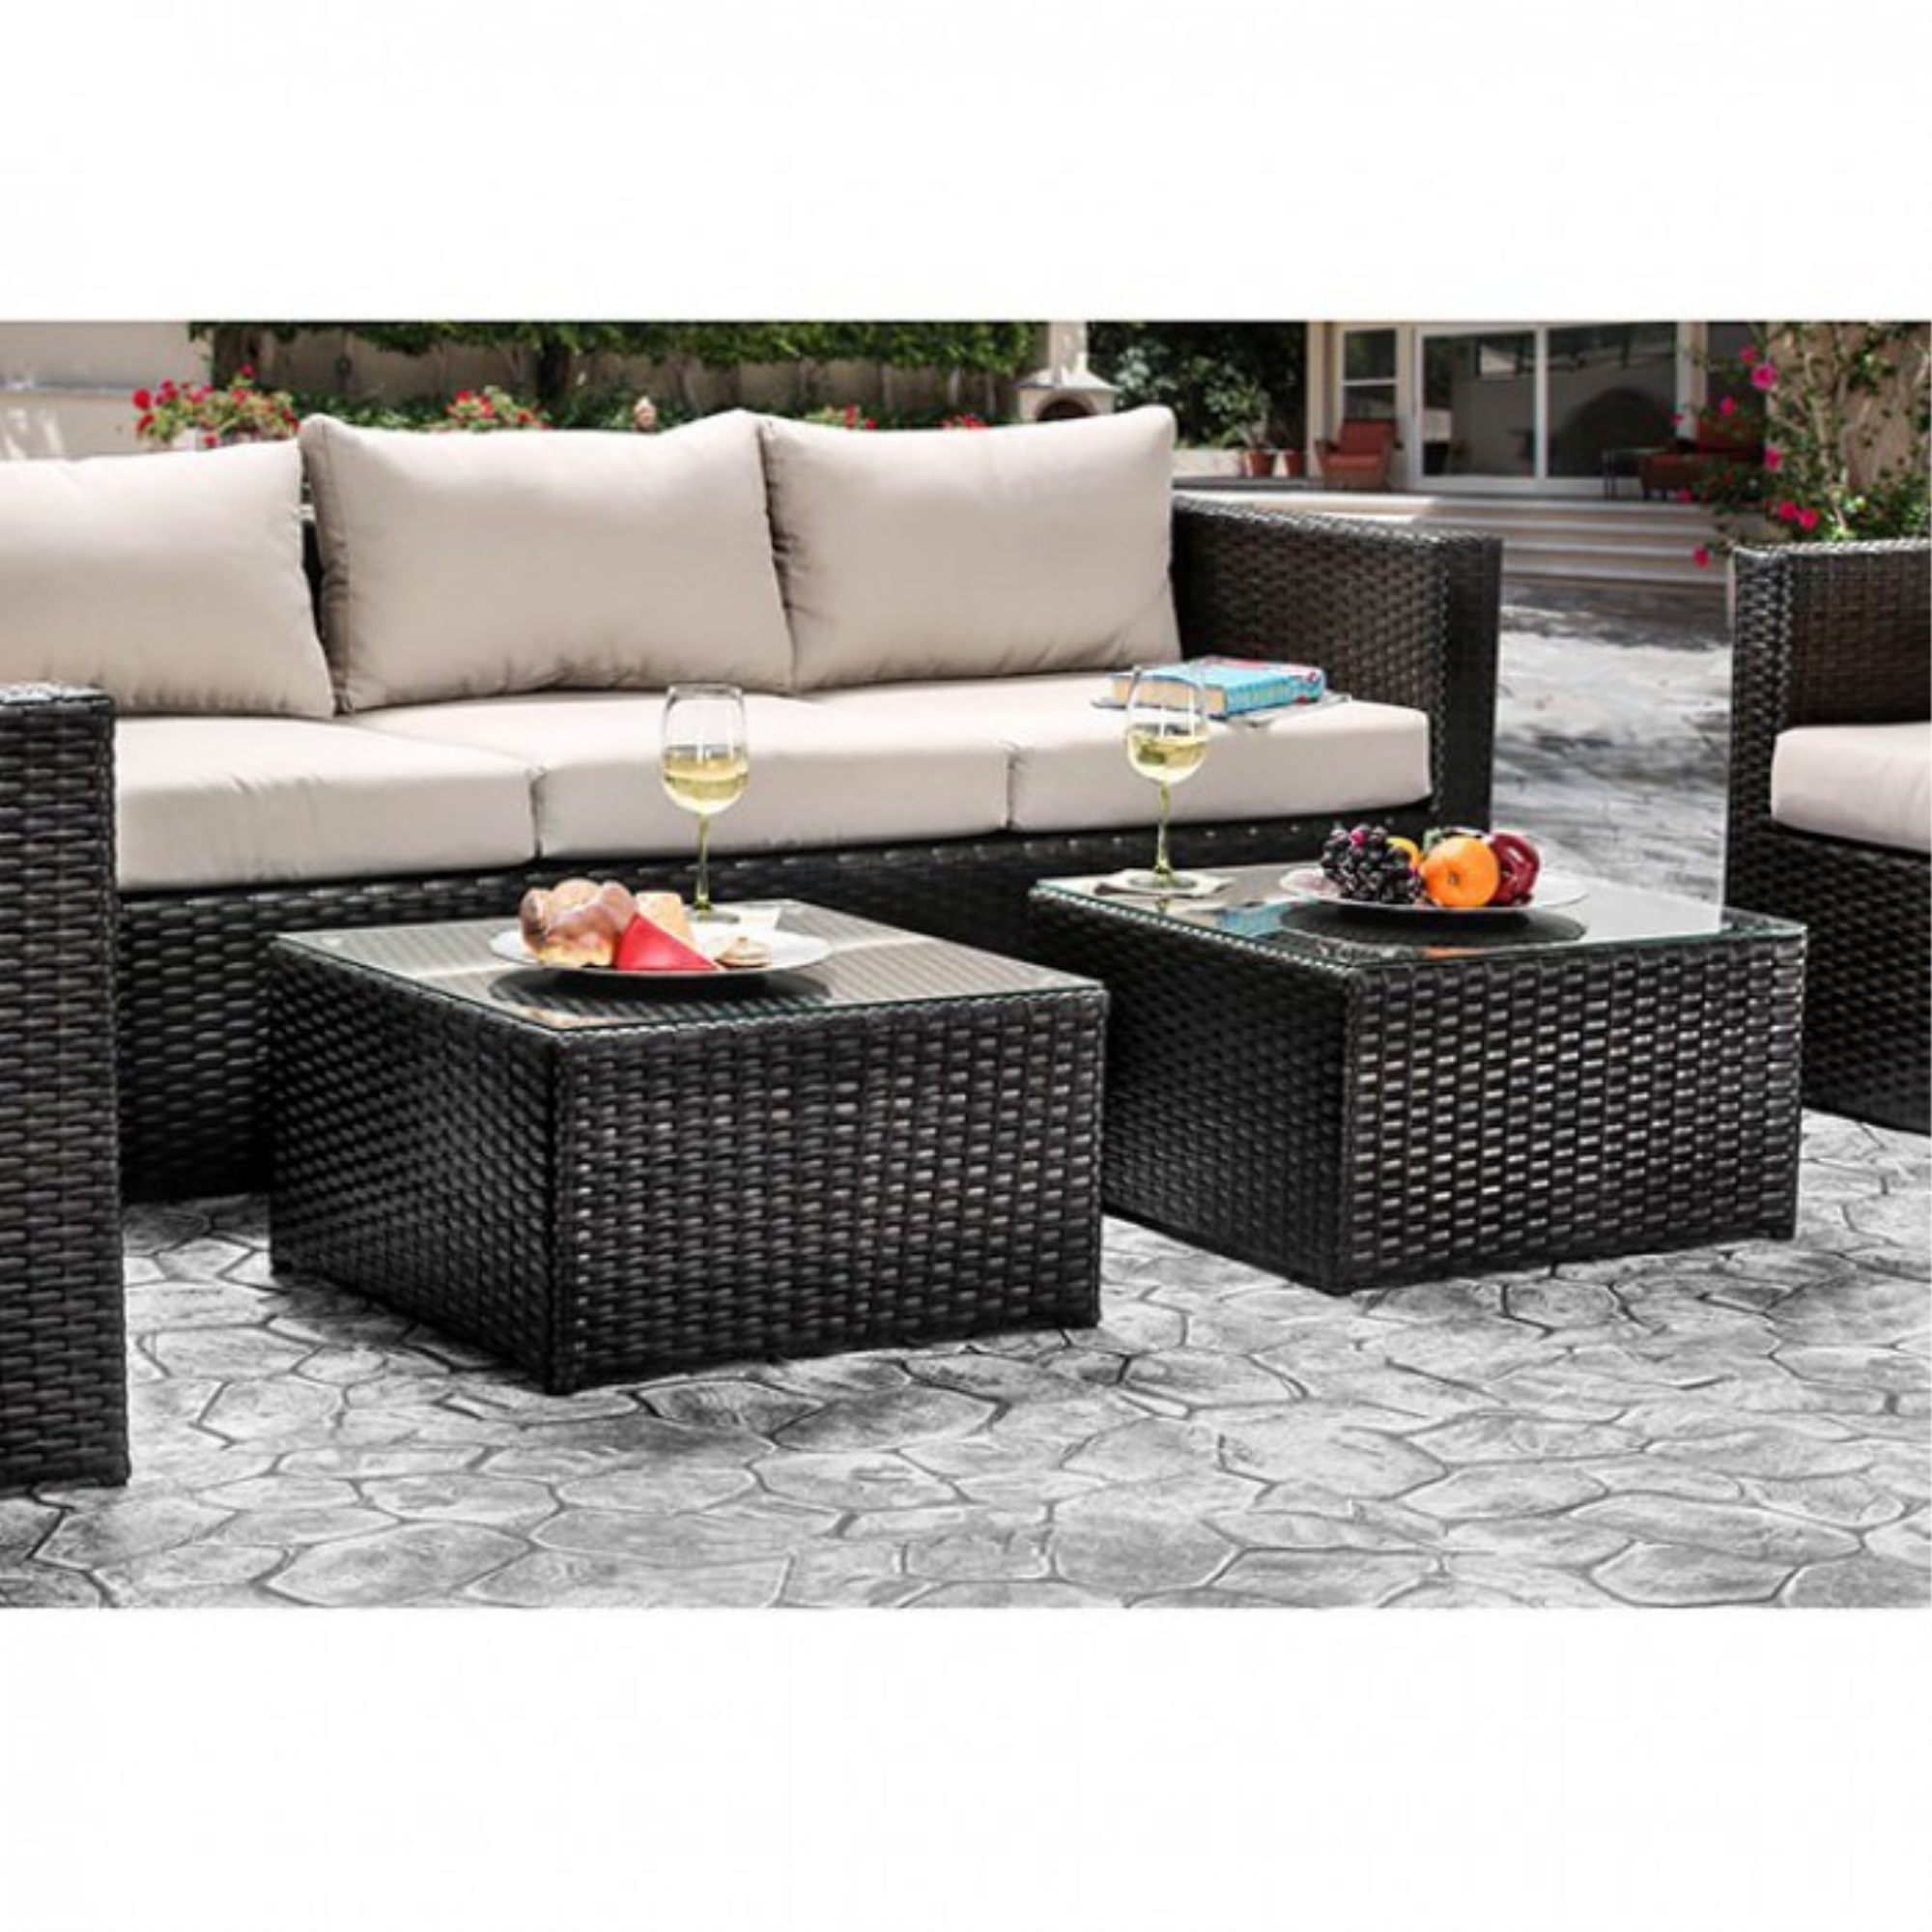 Winsome Contemporary Styled 5 Pc. Aluminum Patio Set, Ivory White/Espresso Brown - image 2 of 2